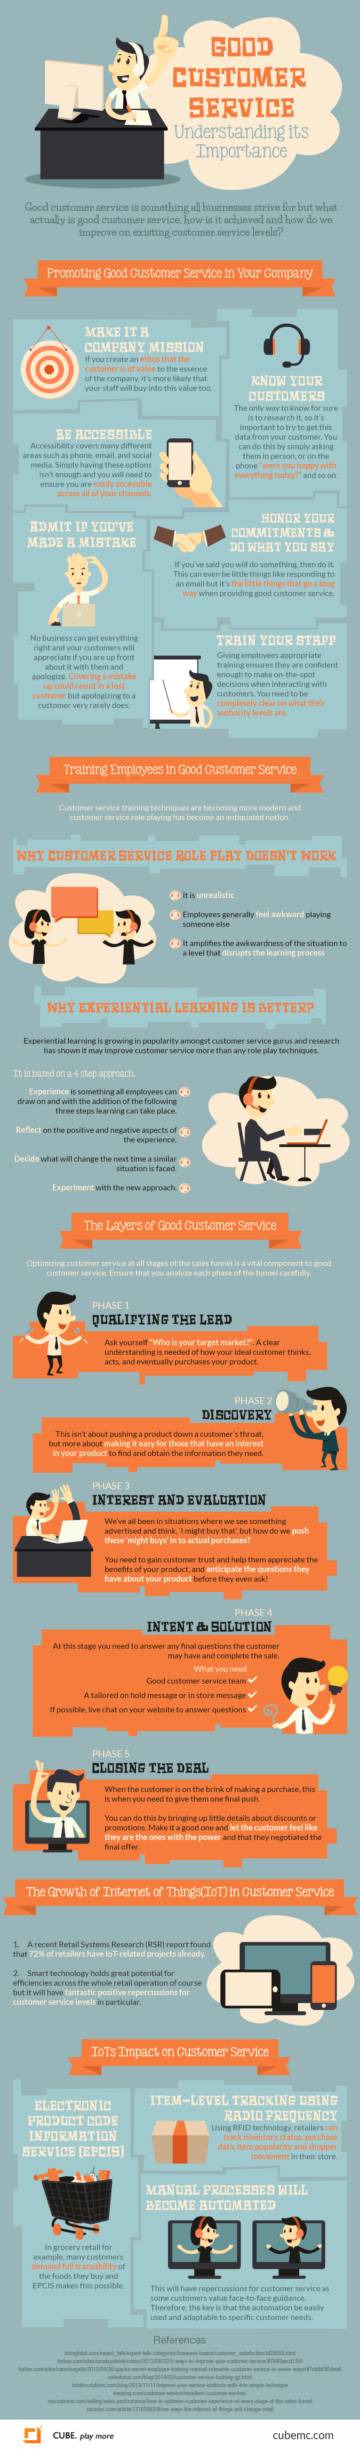 this is an infographic showing you how good customer service helps your business